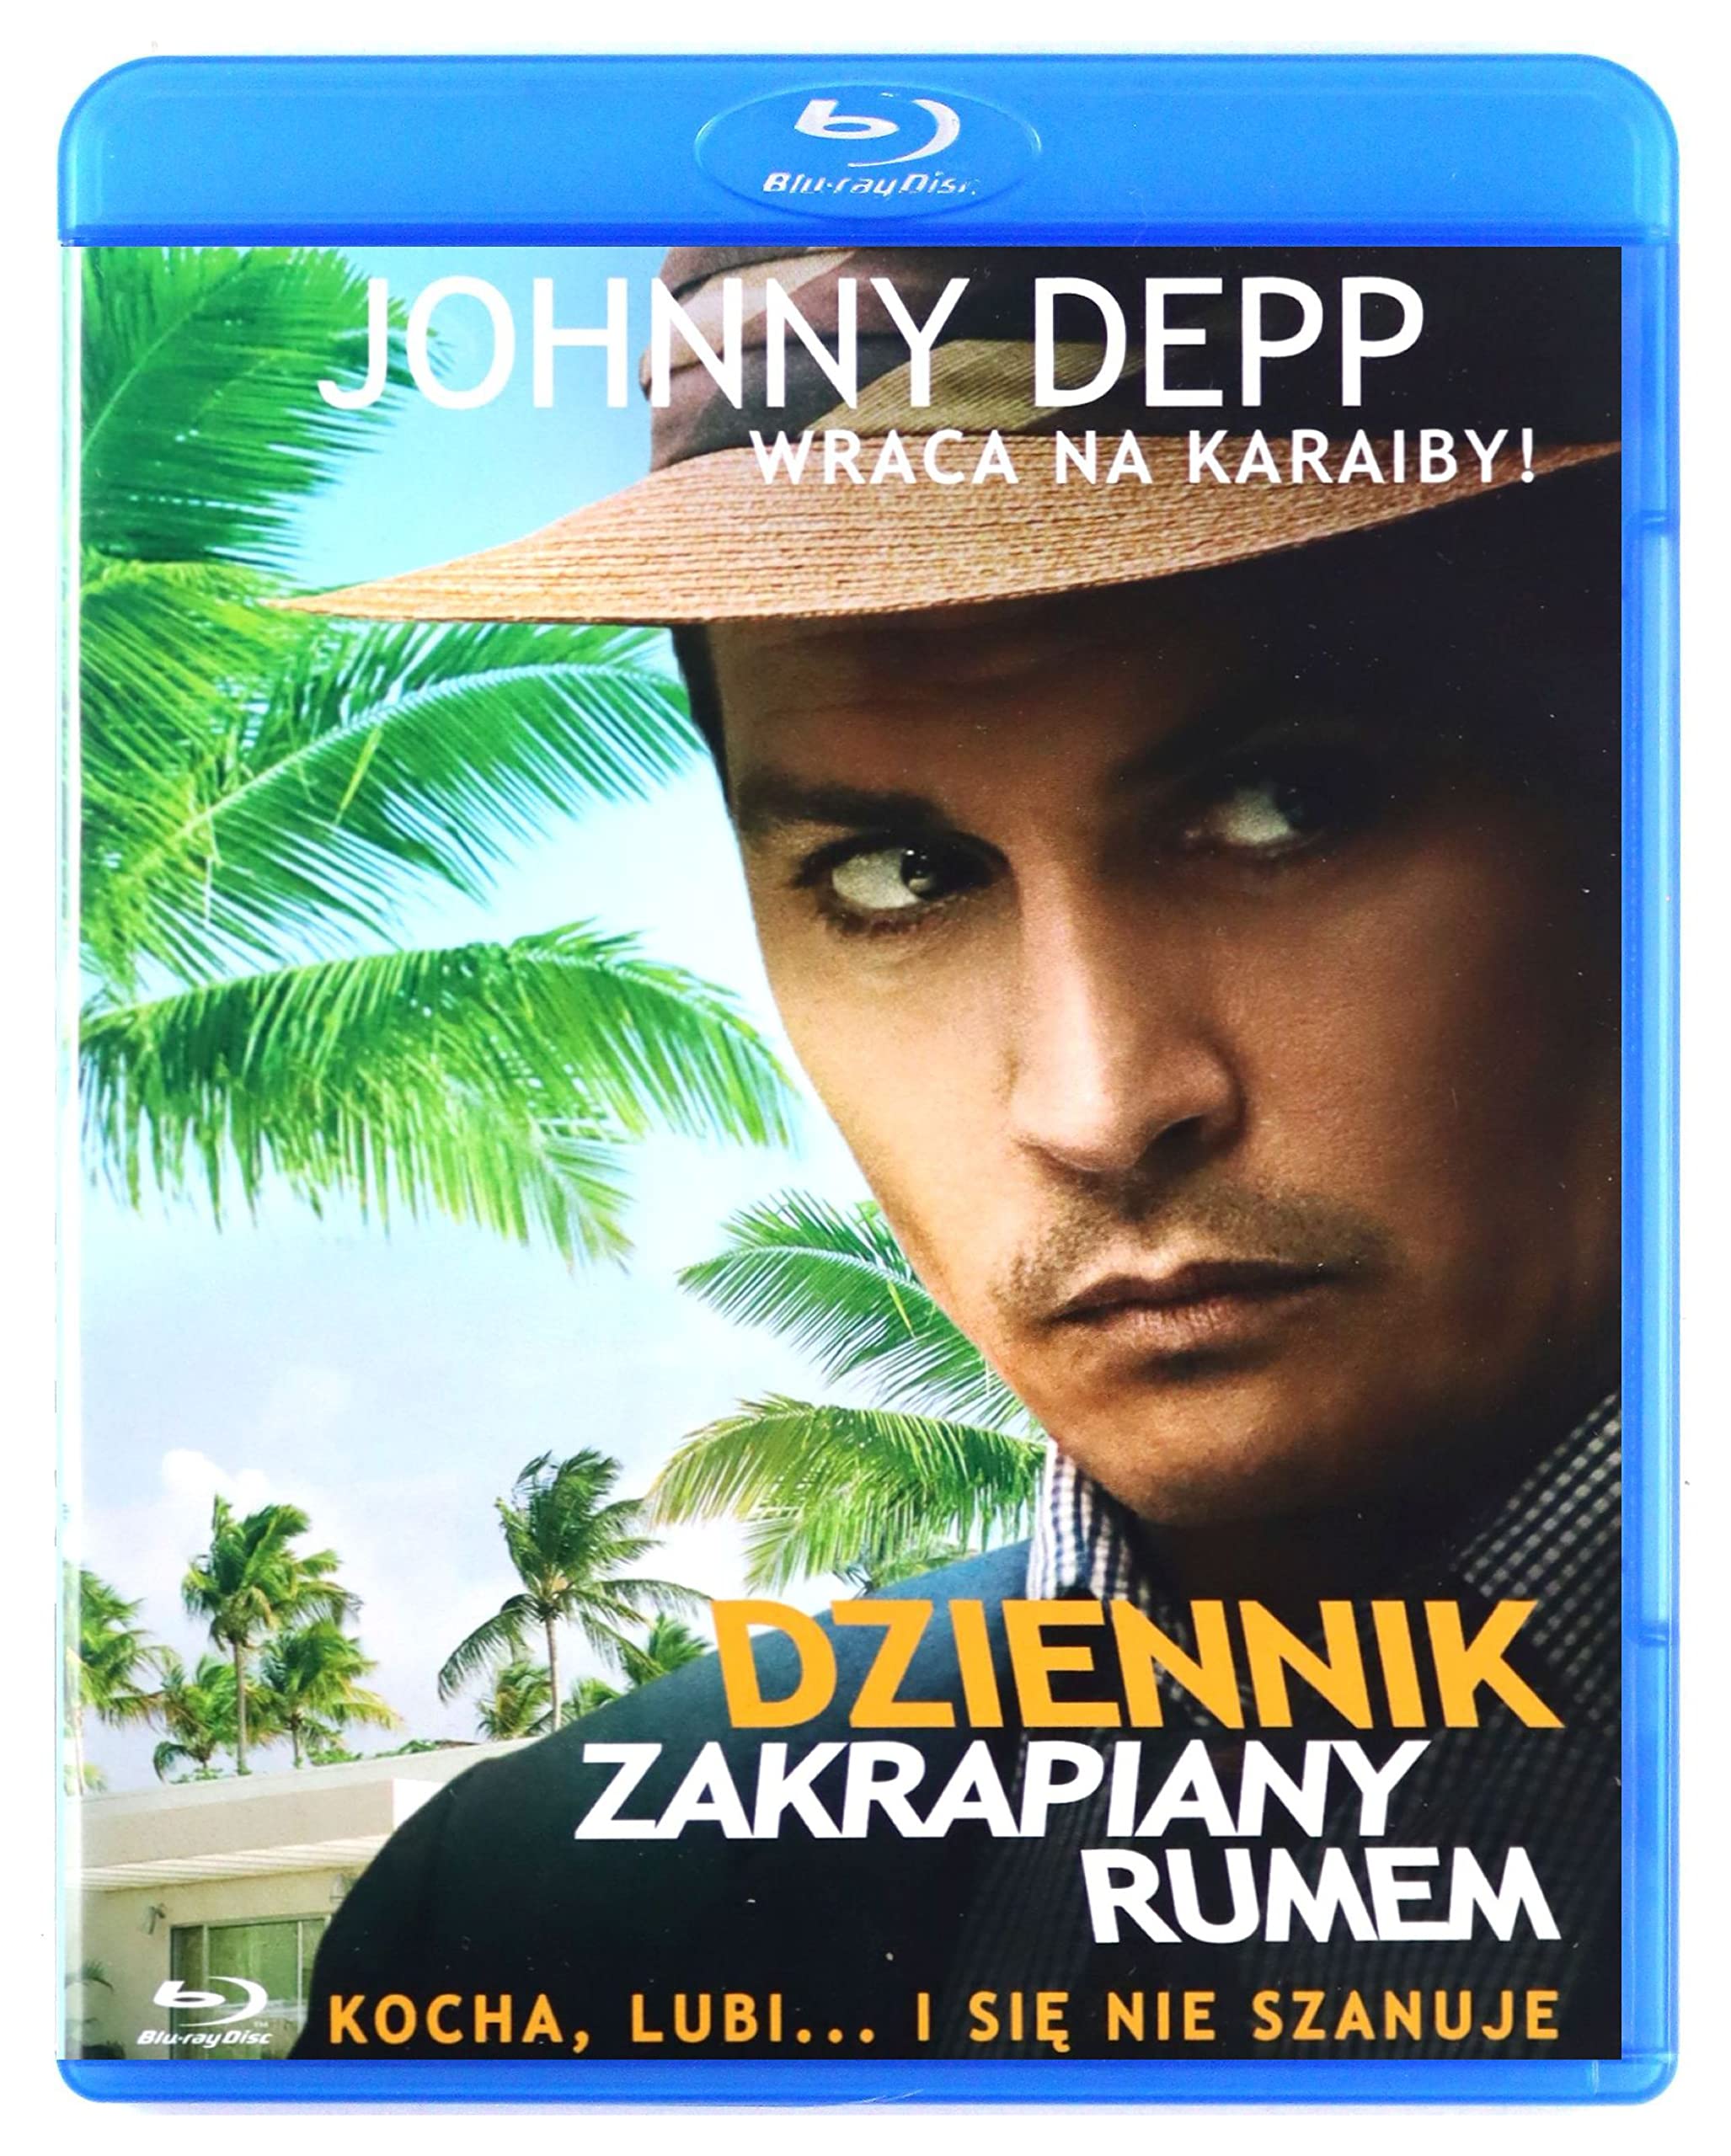 The Rum Diary [Blu-ray] [PL Import]